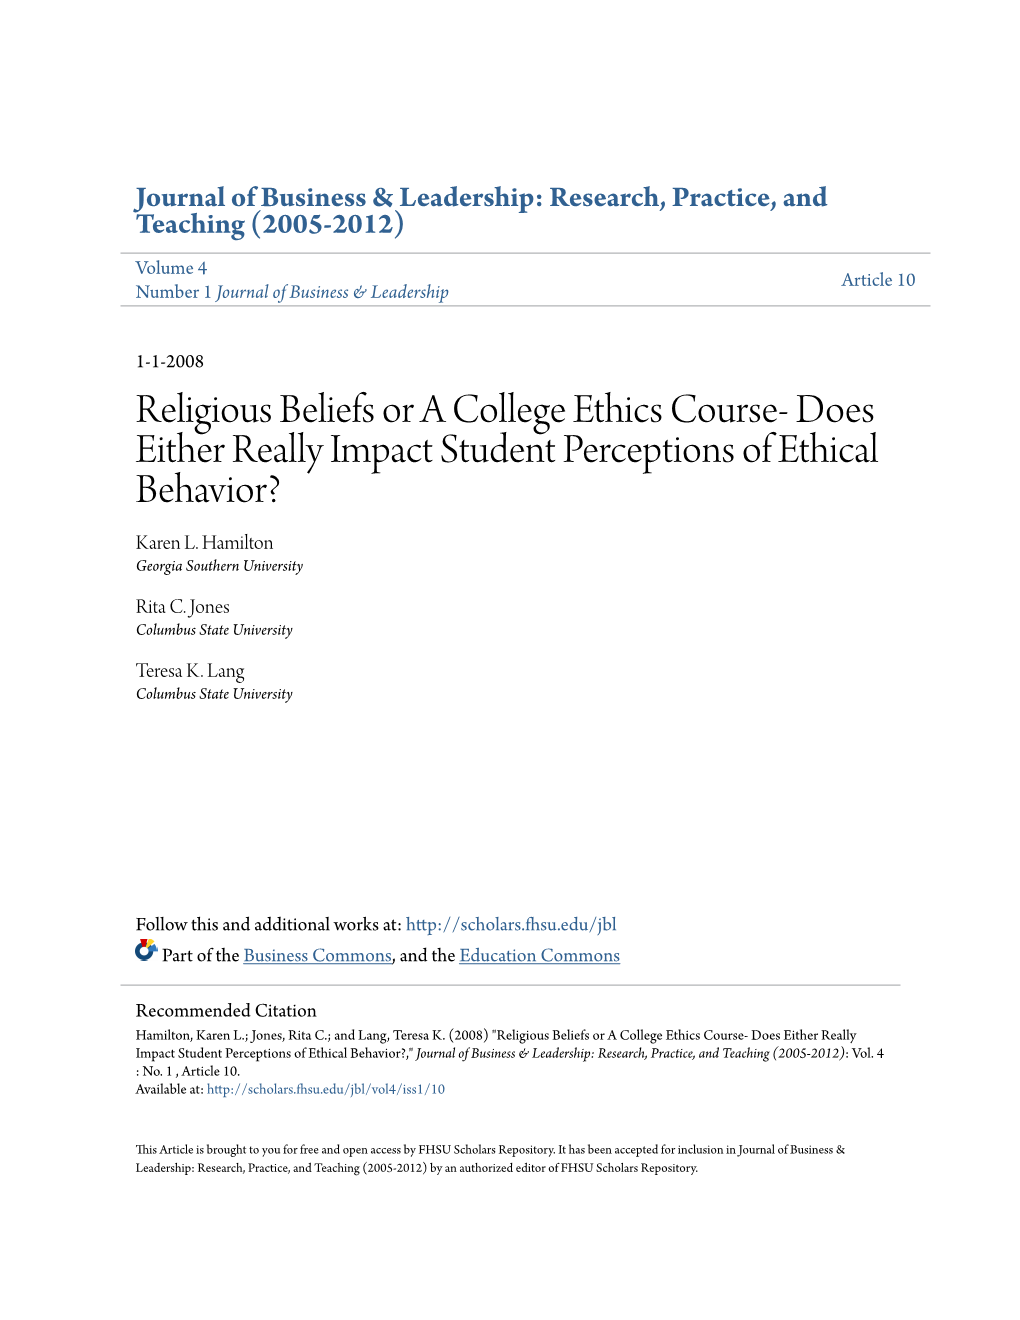 Religious Beliefs Or a College Ethics Course- Does Either Really Impact Student Perceptions of Ethical Behavior? Karen L